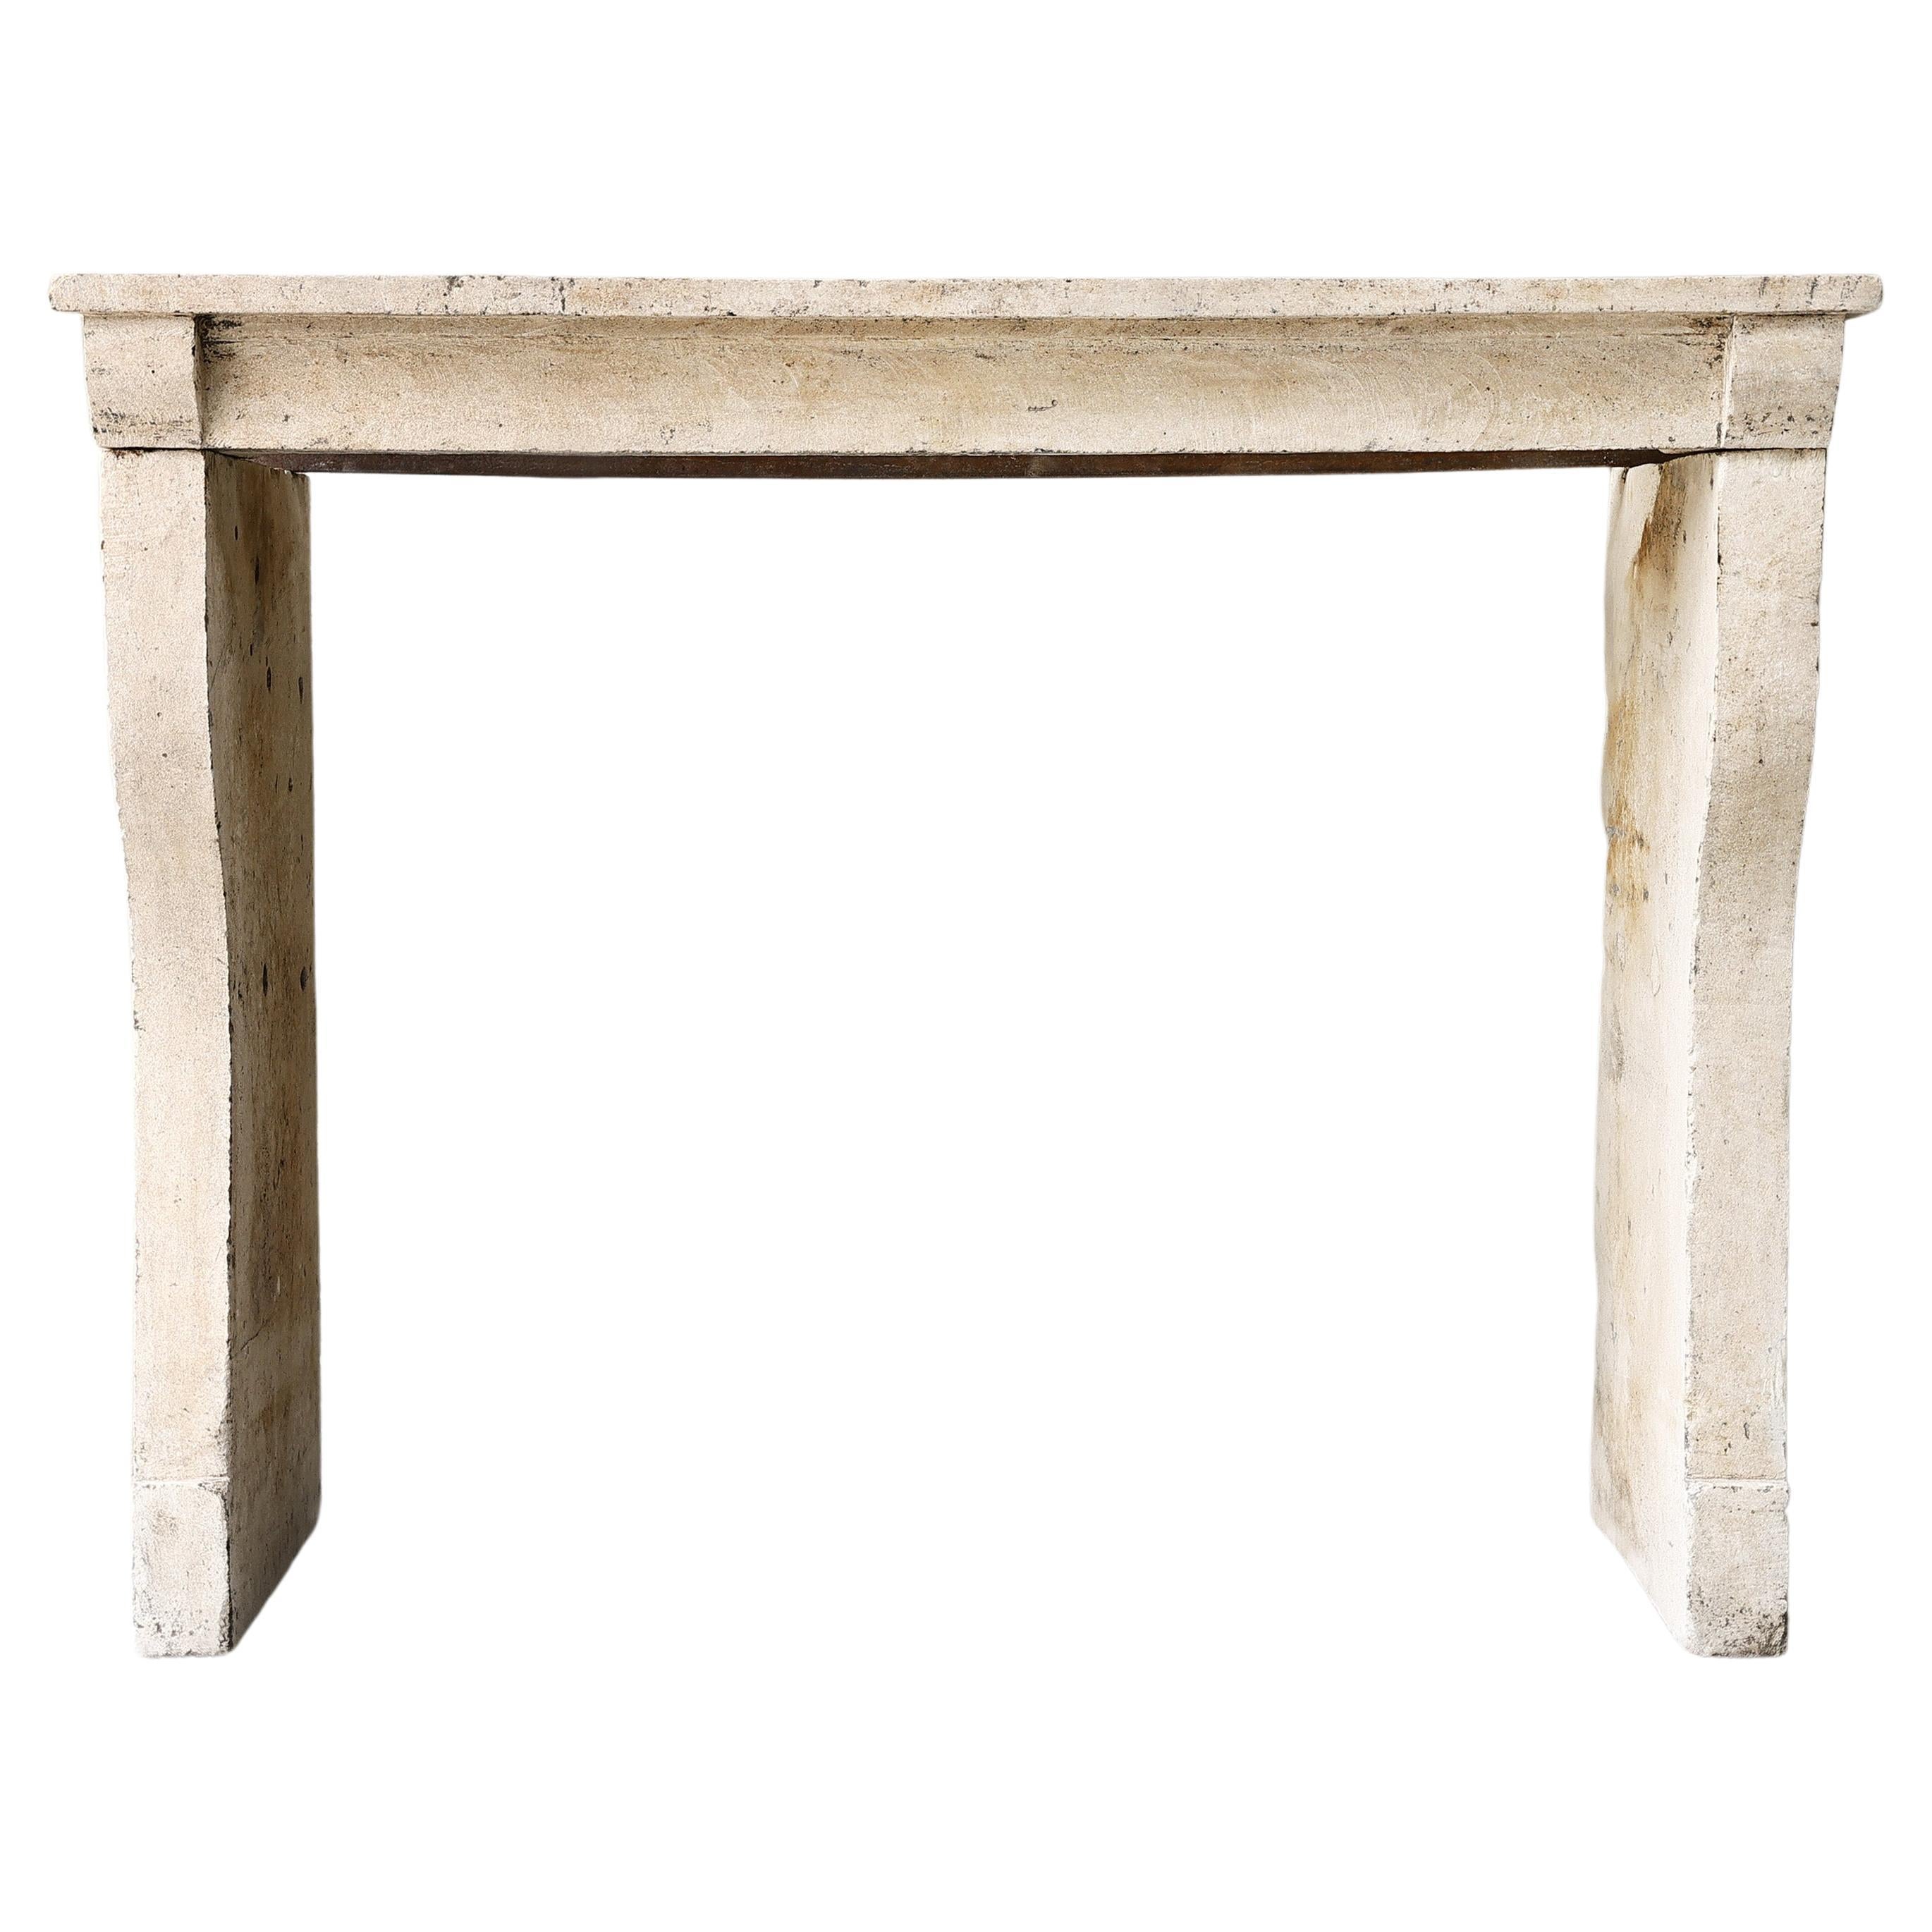 19th century French fireplace of limestone in a simple style